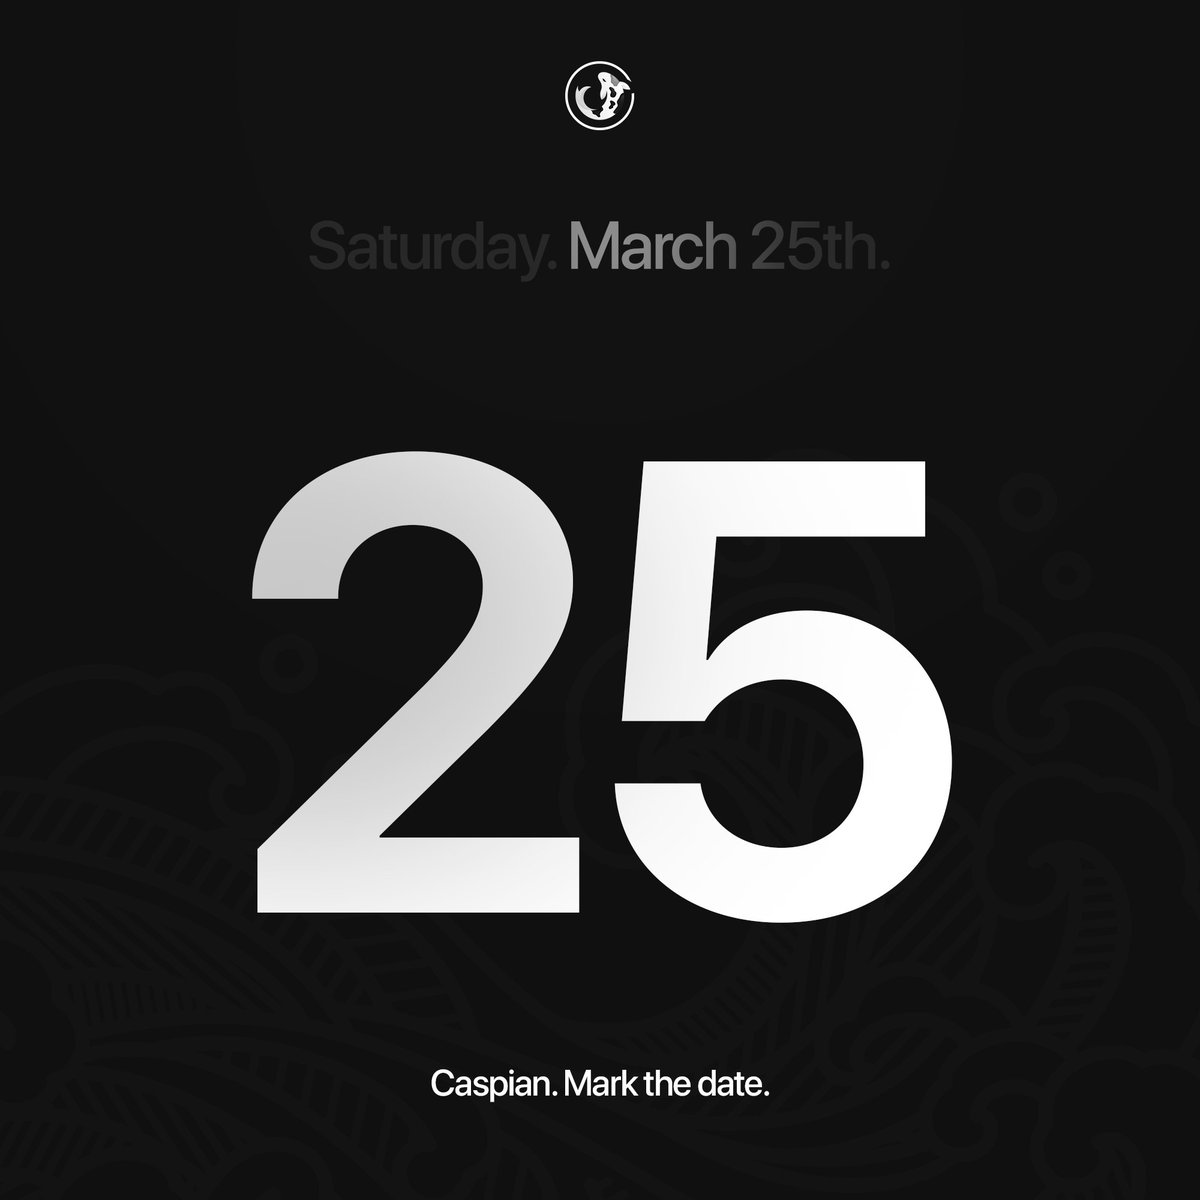 ITS OFFICIAL 🌊 Caspian is all set to launch on March 25, 2023 🎏 - Numerous added modules - Whole new user interface - Added bypasses and exploits + much more Visit whop.com/koi-aio to apply to the official Caspian waitlist ☘️ 👍🏼🔁 - 5x Free Keys More info soon...